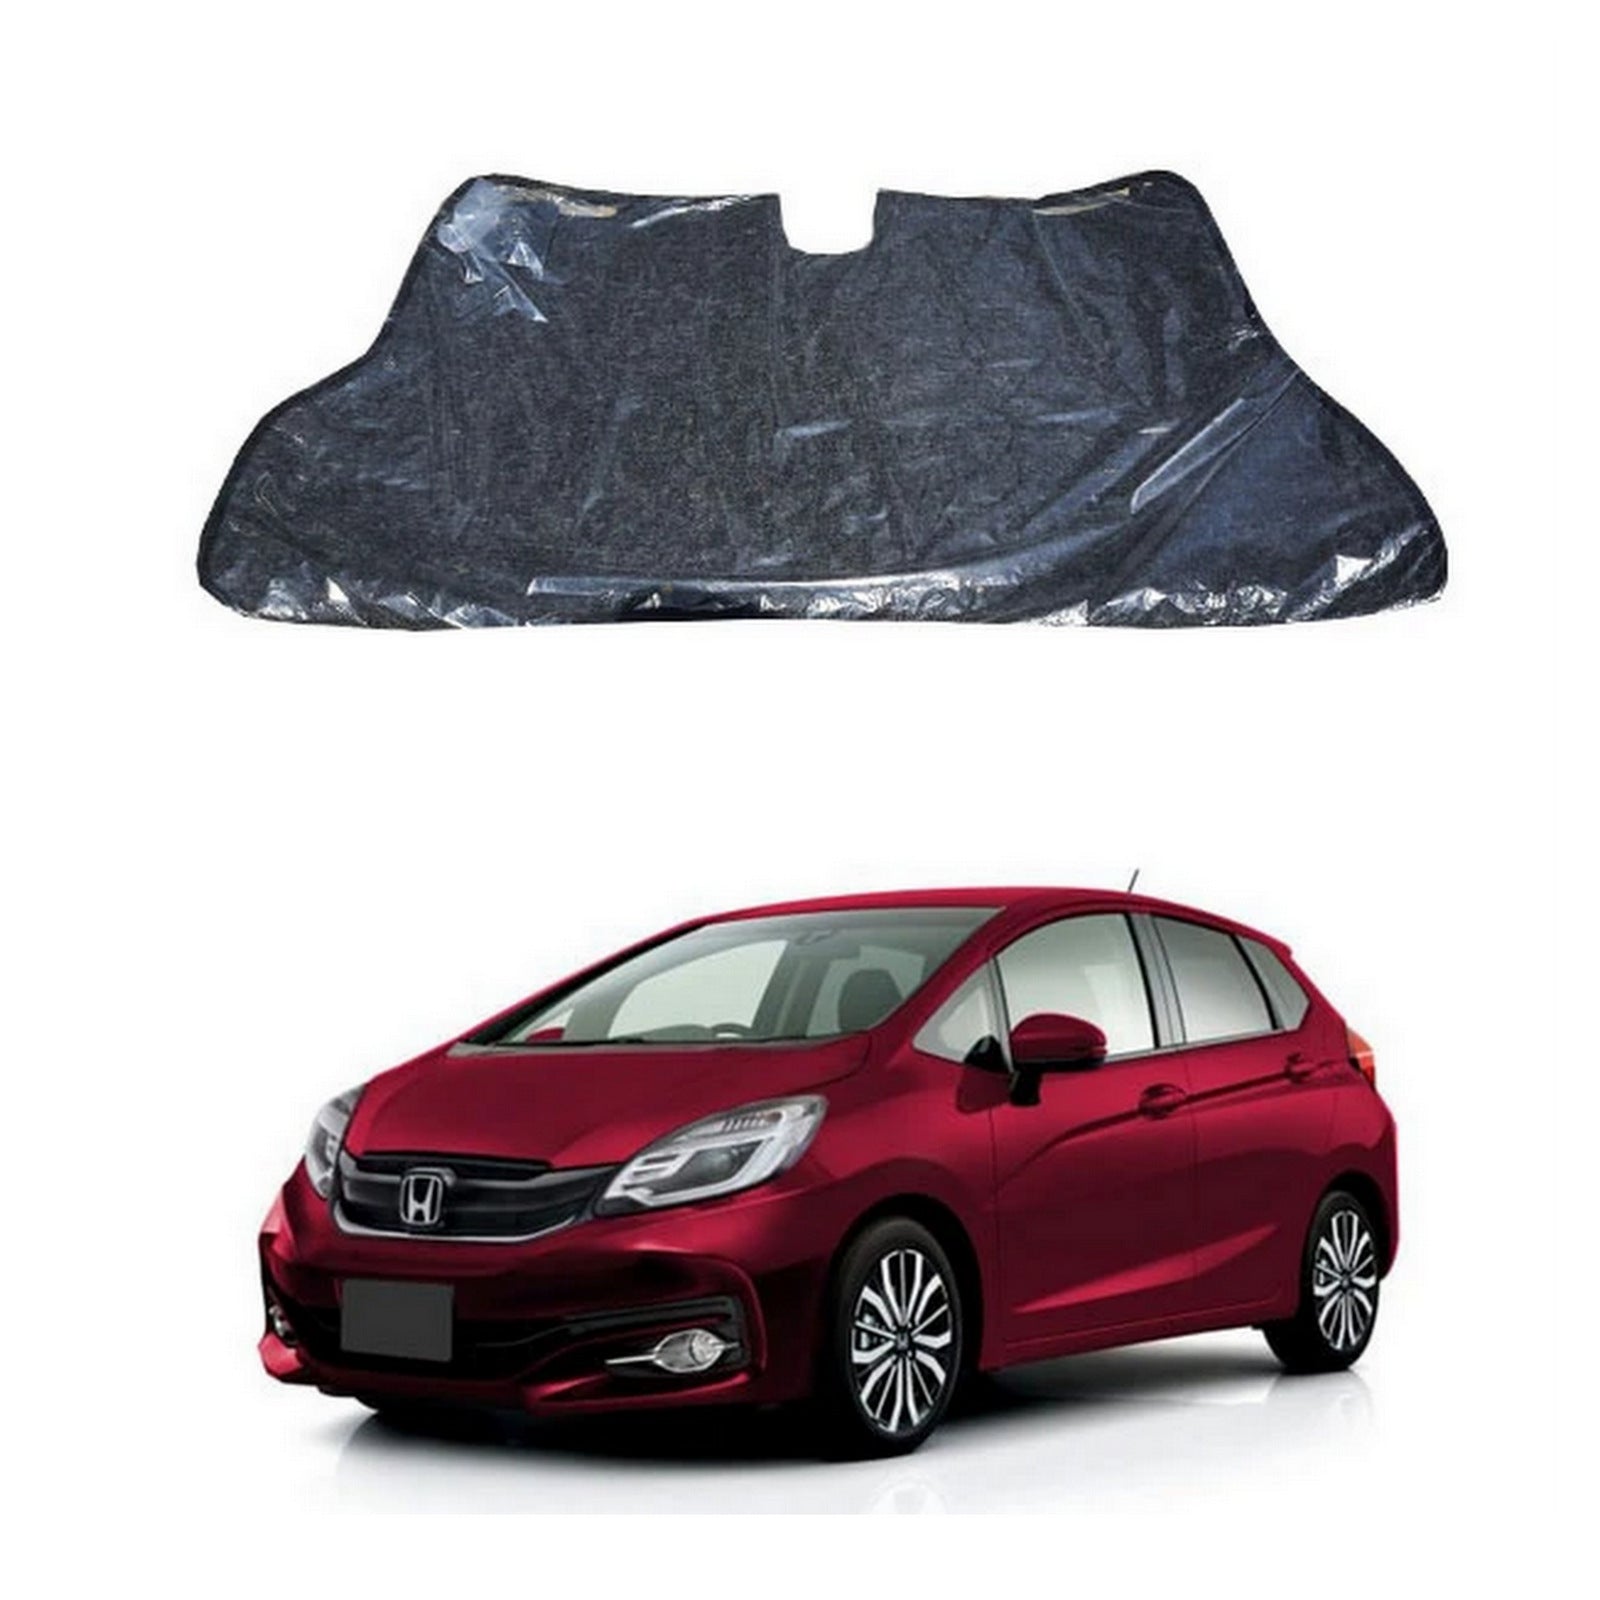 TRUNK LINER PROTECTOR FOR HONDA FIT (2013-2018)